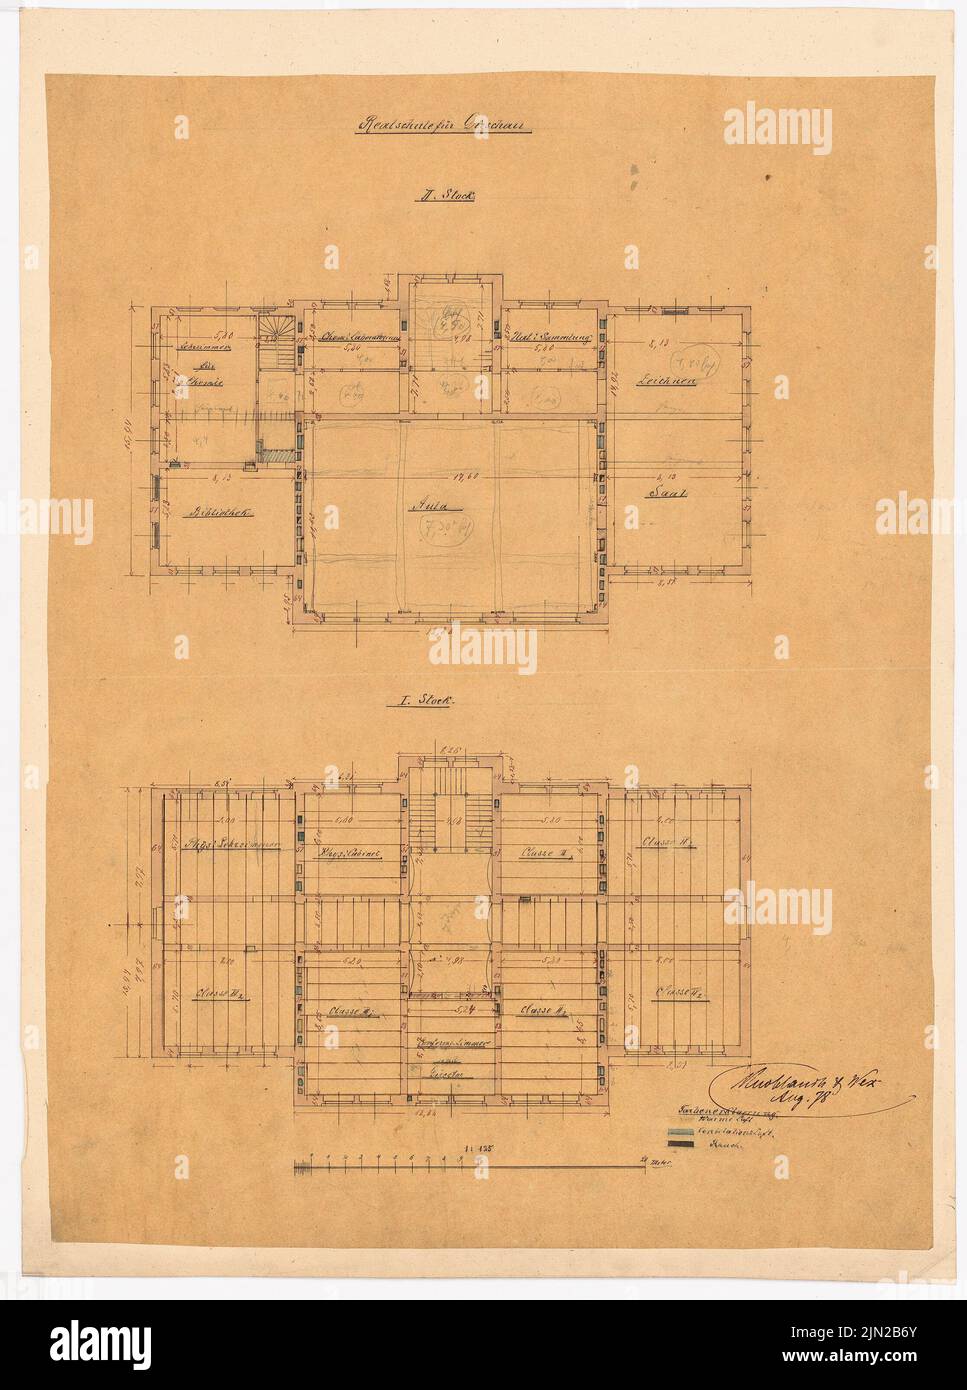 Knoblauch & Wex, Realschule, Dirschau: floor plan 1st floor, 2nd floor. Ink, pencil watercolored on transparent on paper, 61.8 x 46 cm (including scan edges) Stock Photo